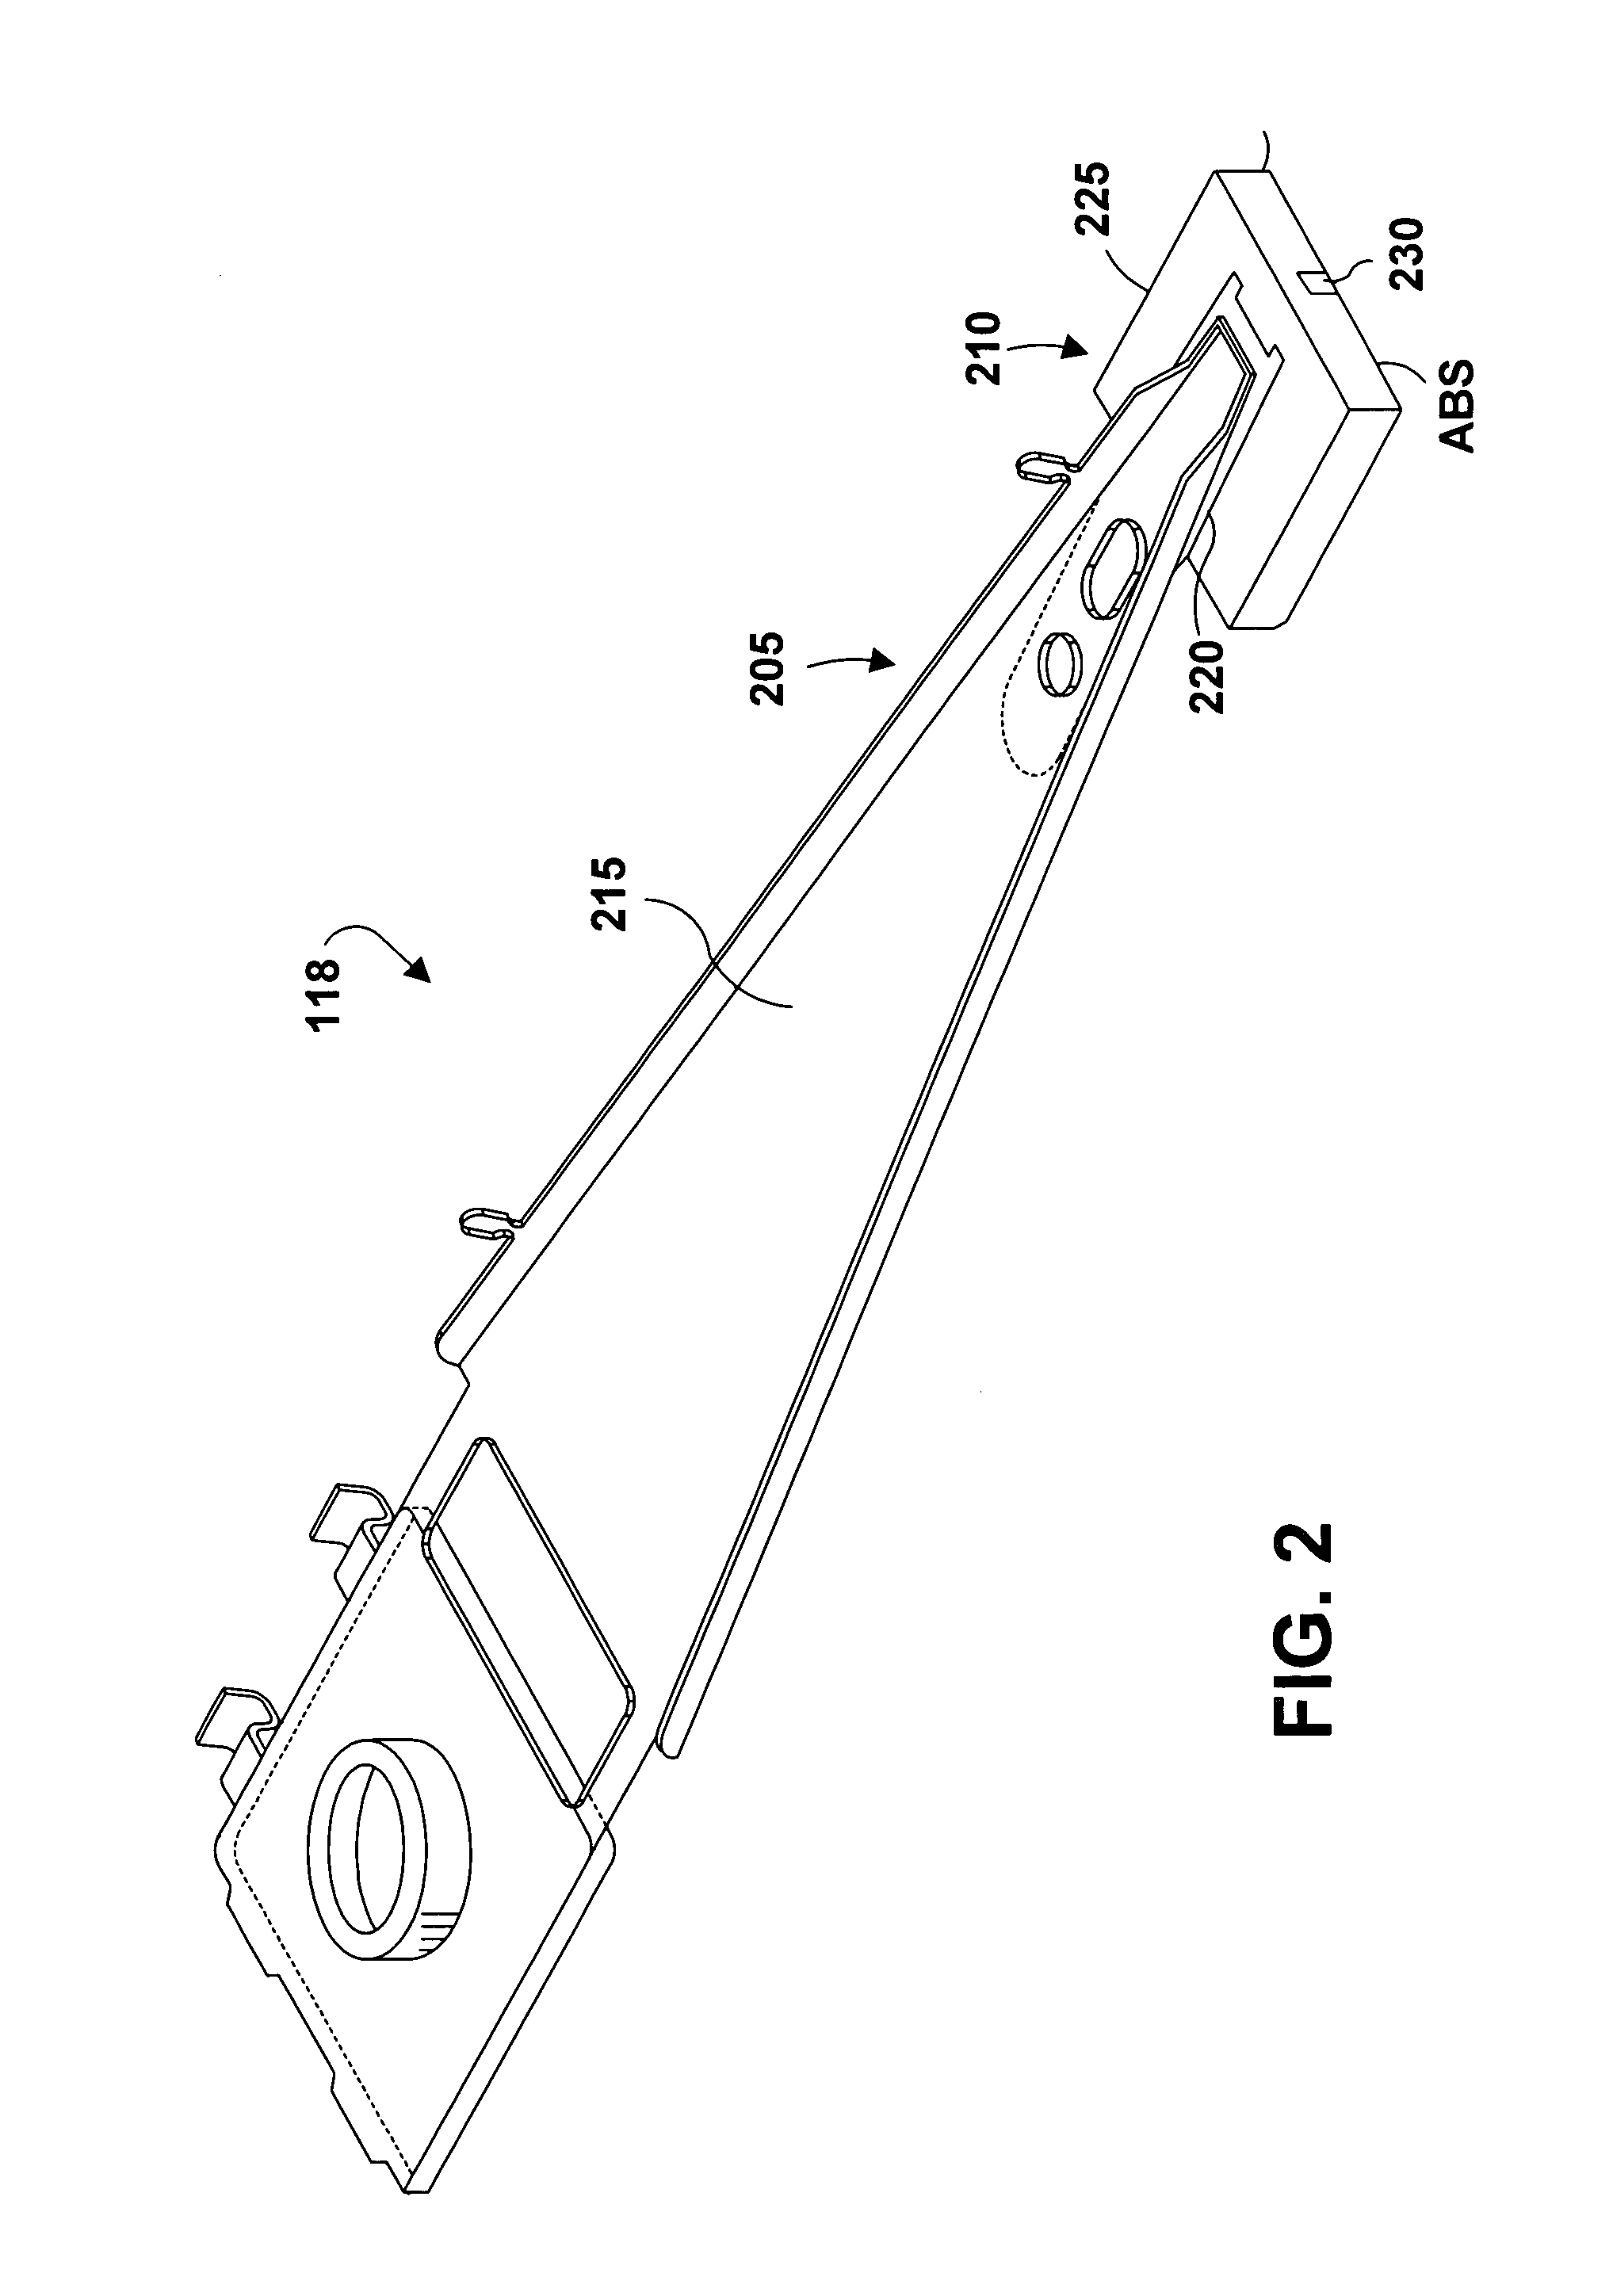 Write element for perpendicular recording in a data storage system